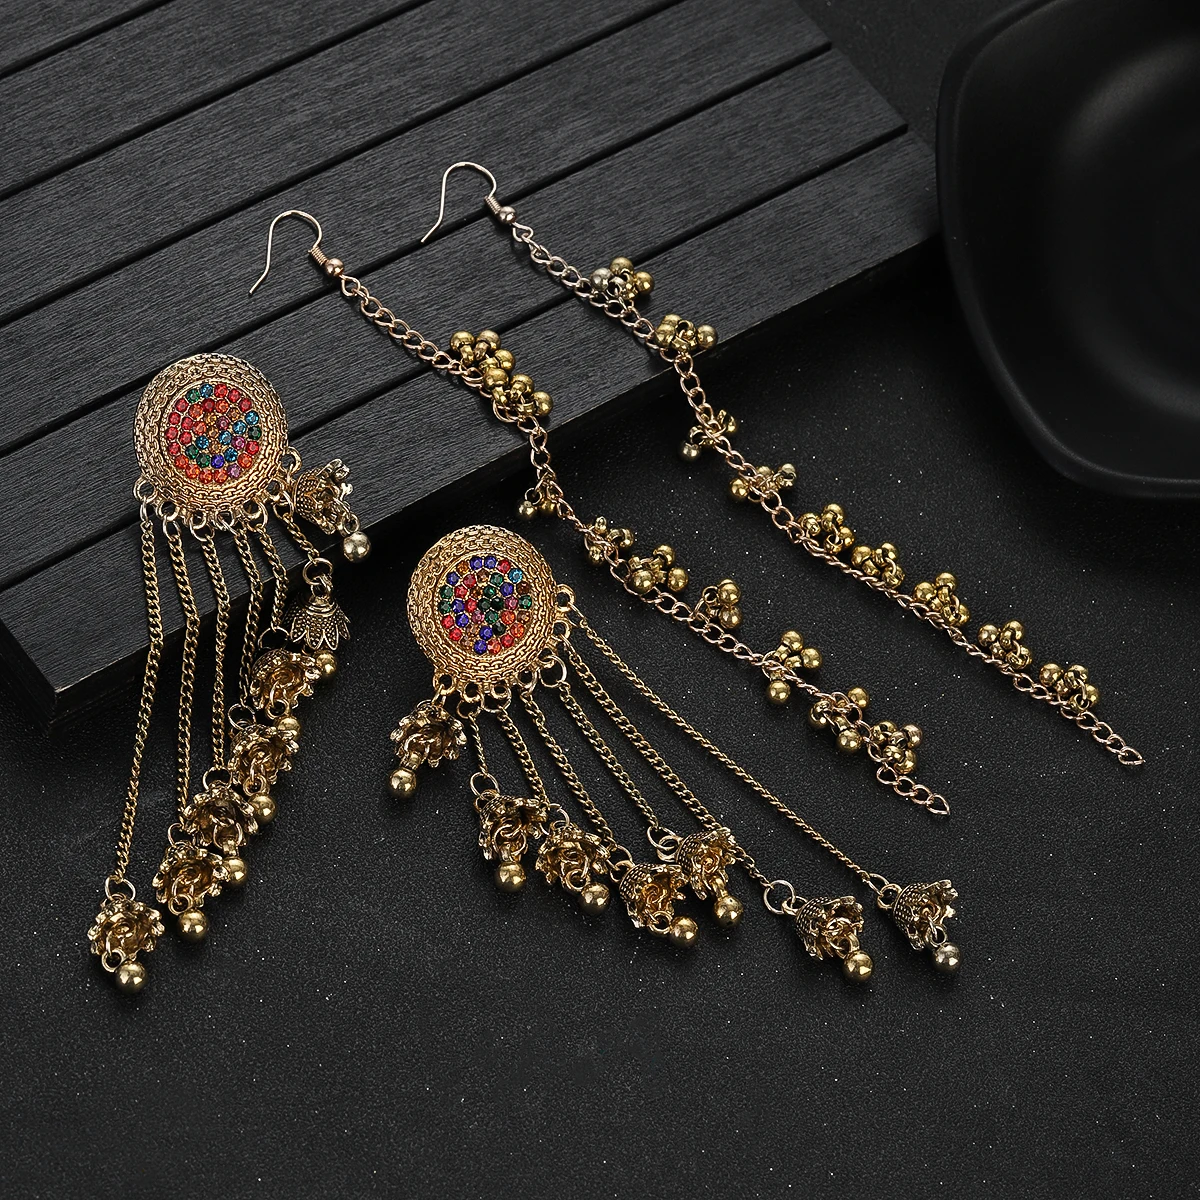 2024 Retro Long Tassel Earrings Women Gold Color Female Round Crystal Chain Bell Drop Earrings Indian Jewelry Accessories Gift